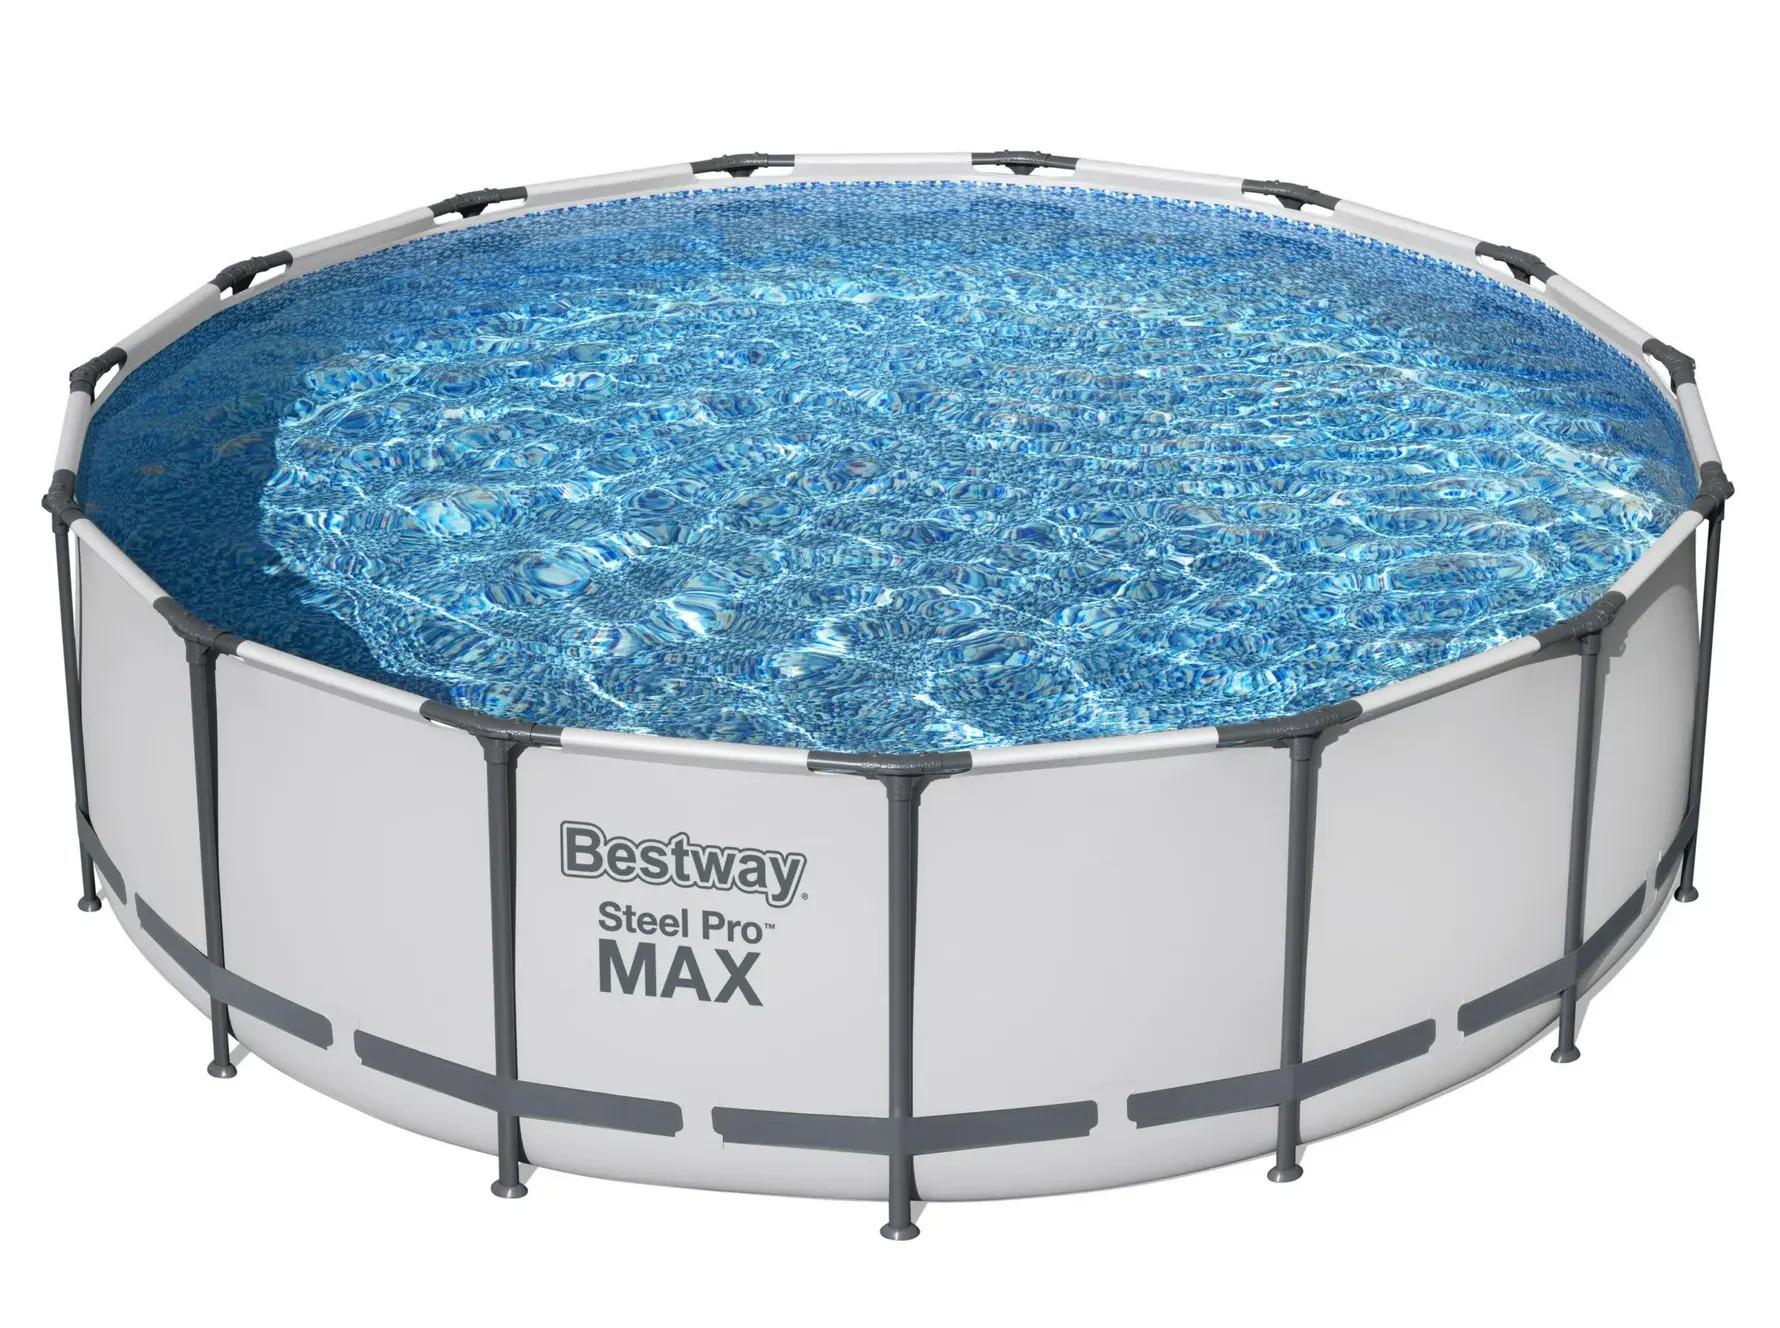 Bestway Steel Pro Max Round Ground Pool Set for $298 Shipped